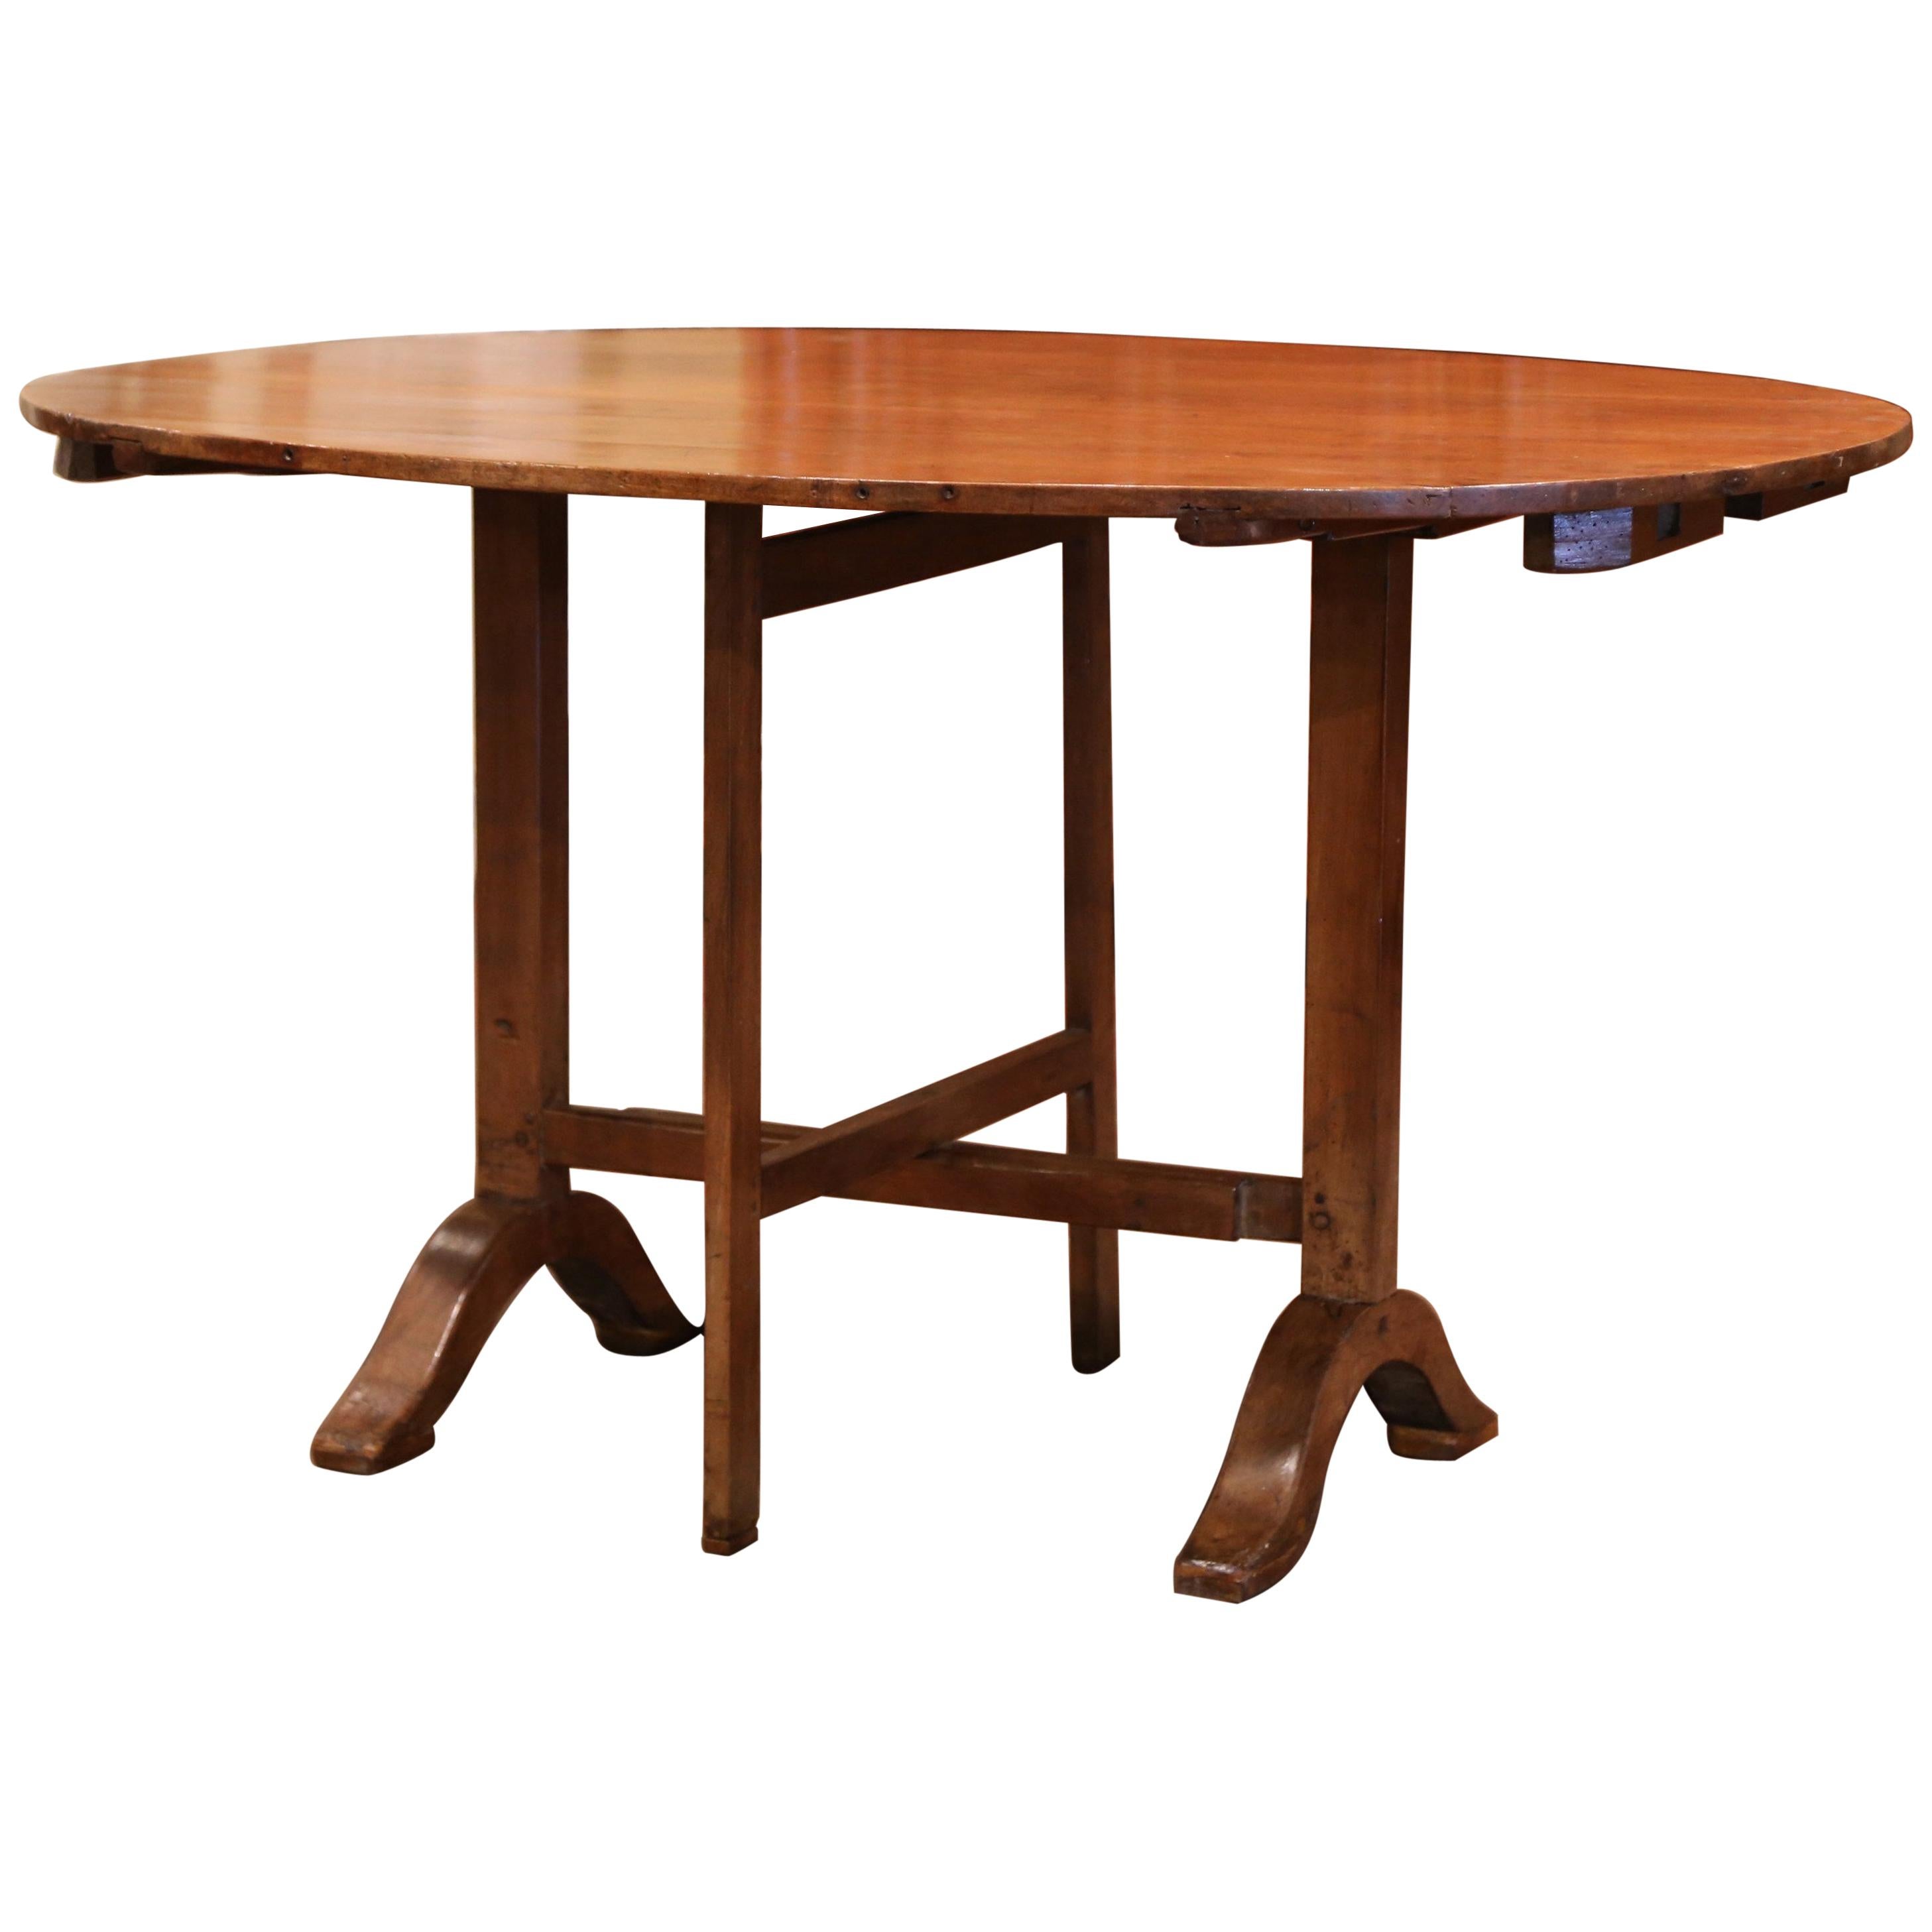 19th Century French Walnut Oval Tilt-Top Wine Tasting Table from Burgundy